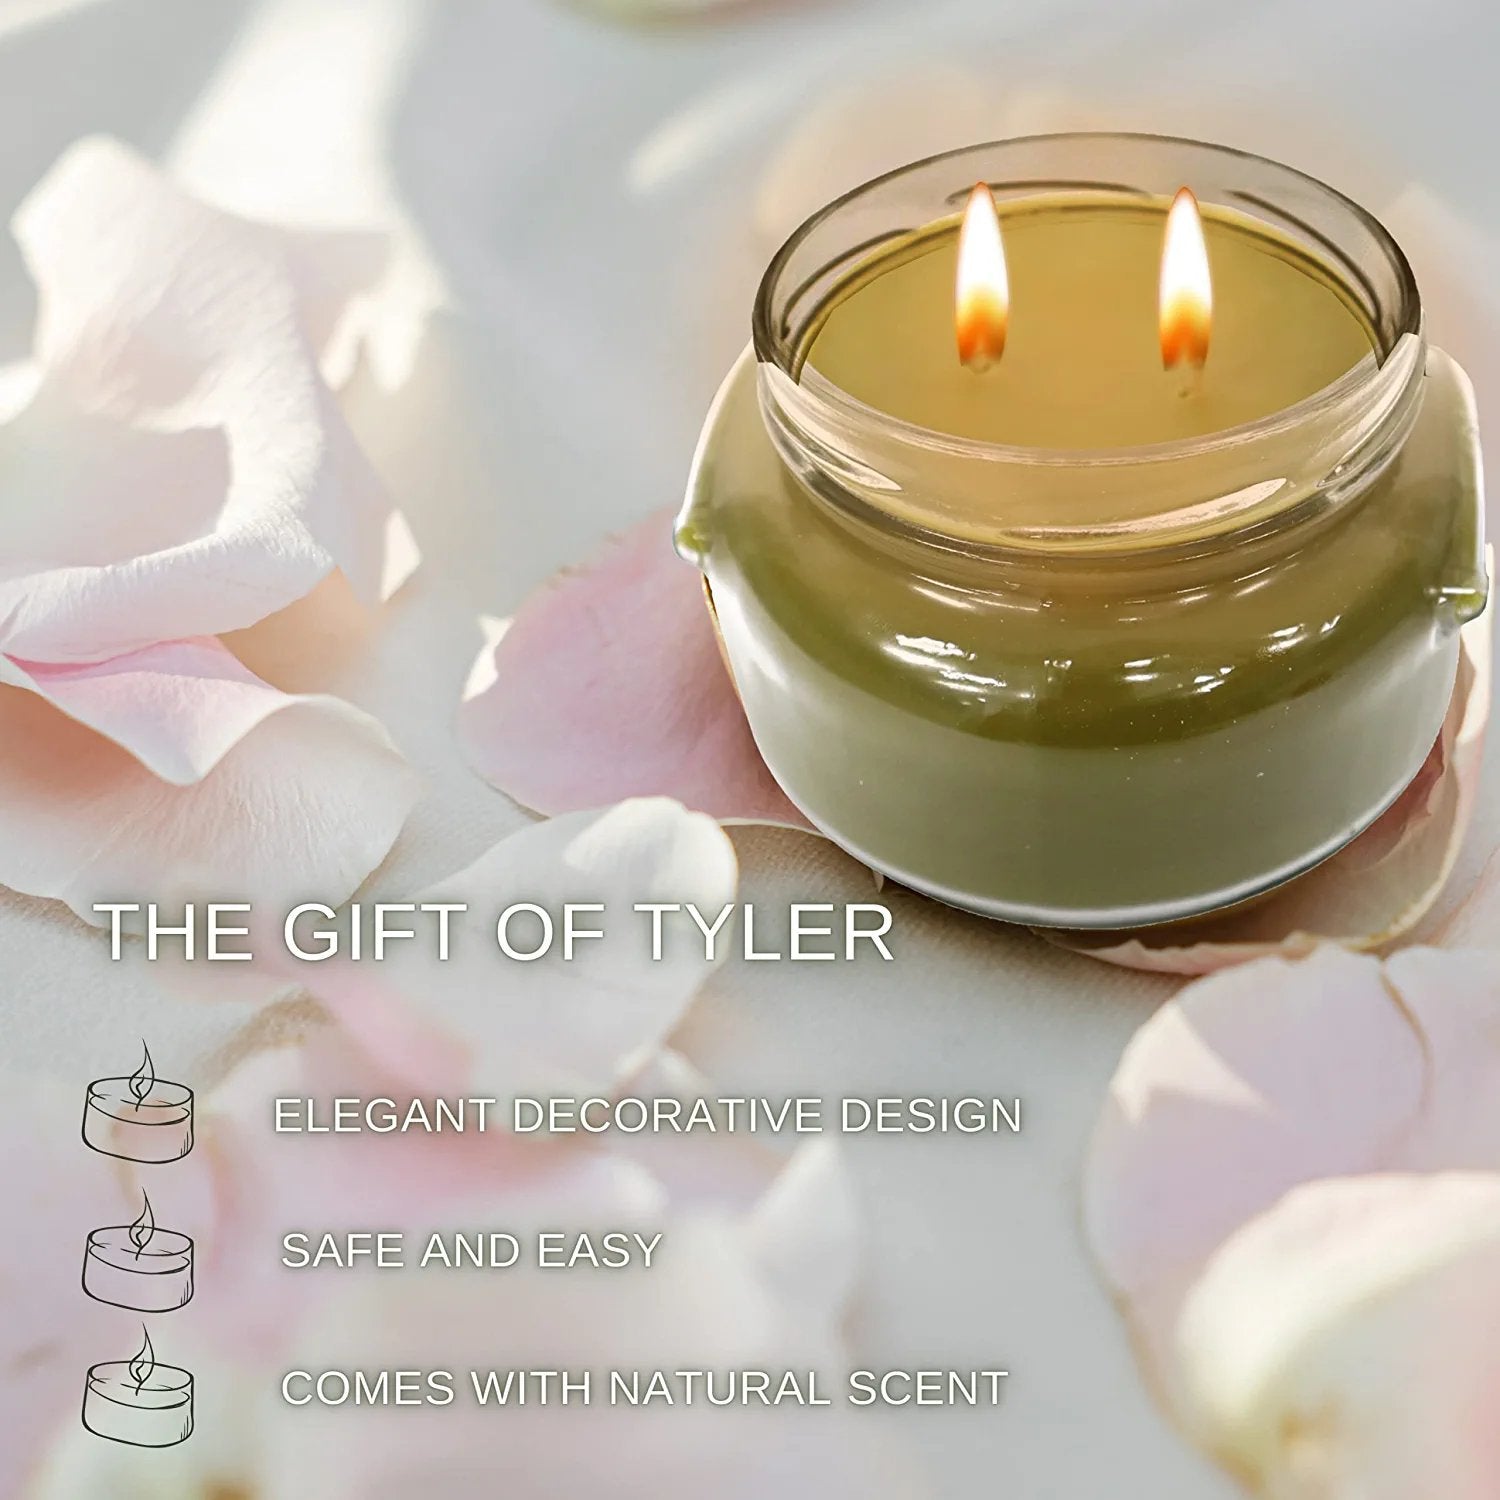 Tyler Candle Company, Seasons Greetings Jar Candle, Scented Candles Gifts for Women, Aromatherapy Candle, Luxury Candles w Essential Oils, Large Candle 11oz w Bonus Keychain